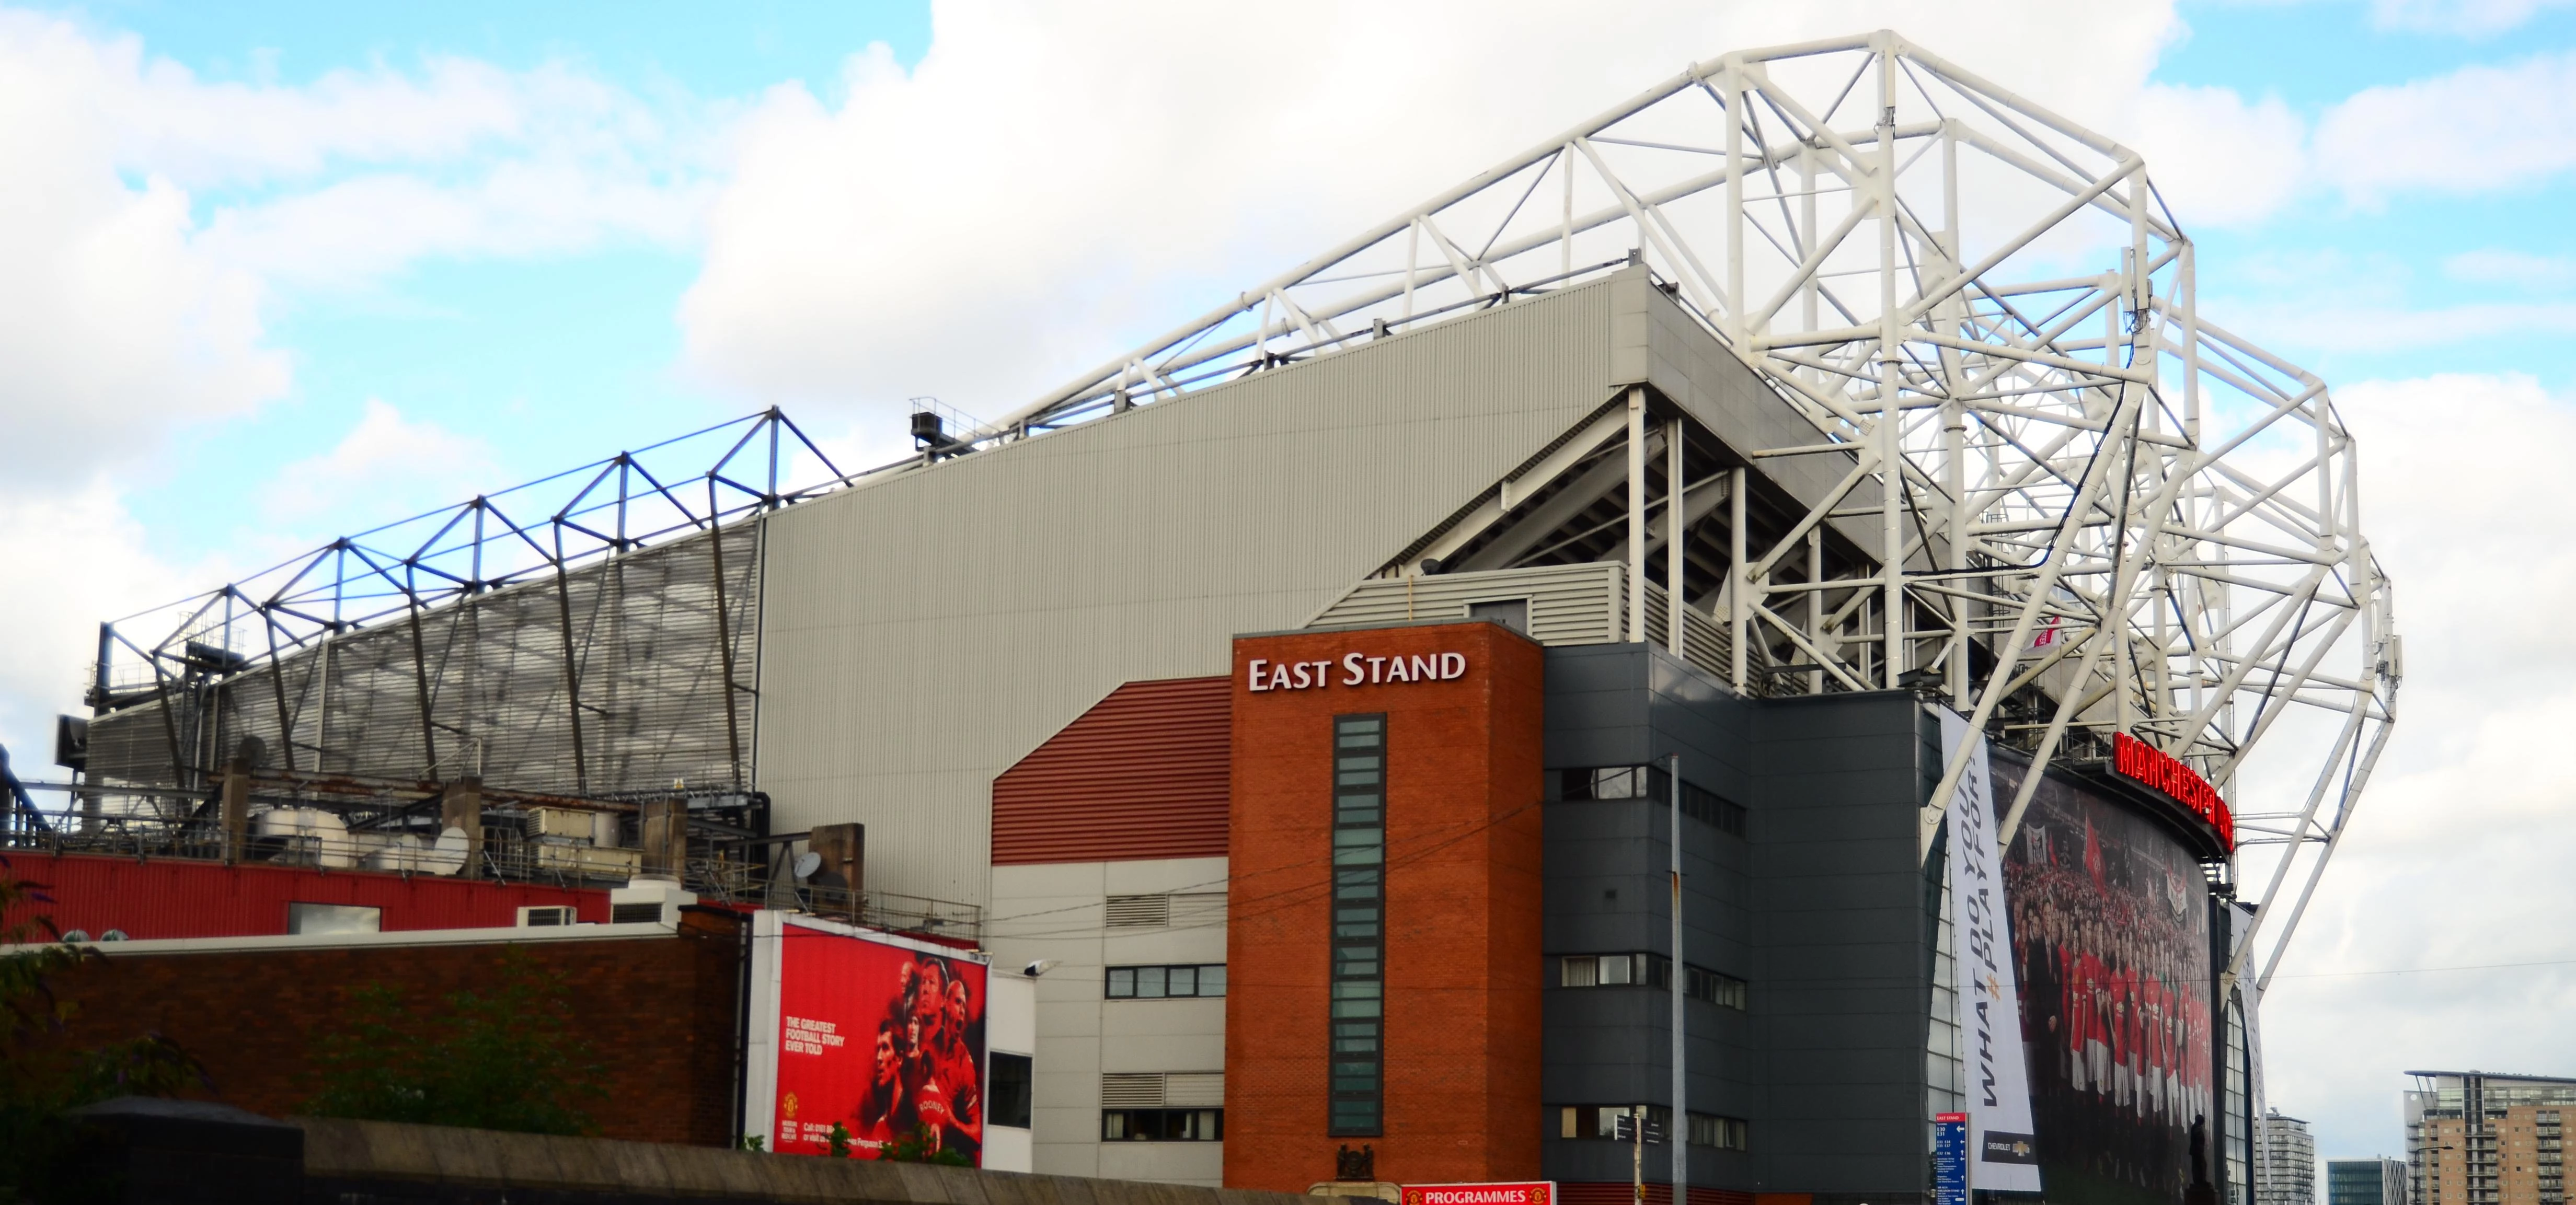 East Stand of Old Trafford